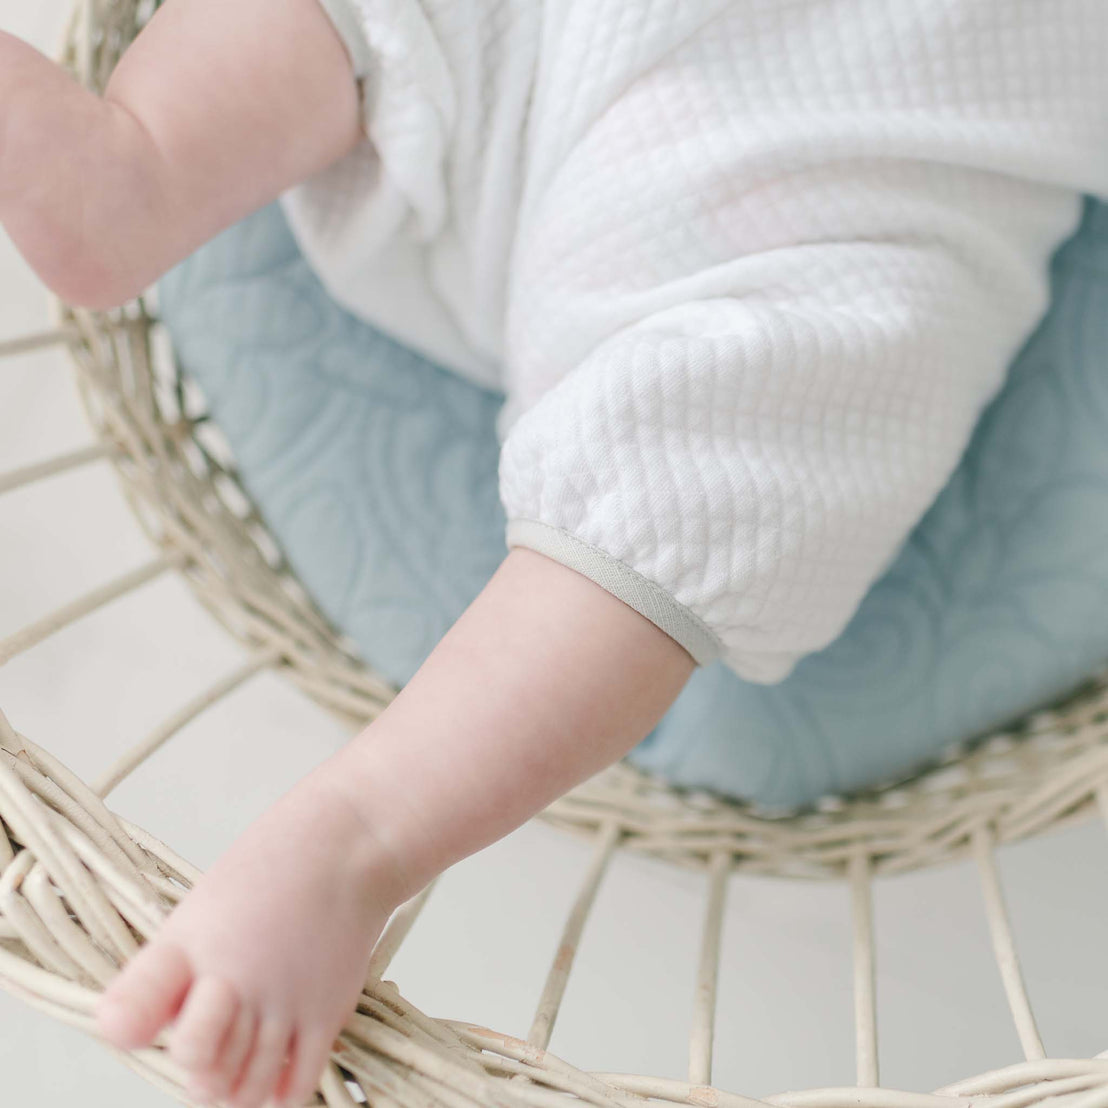 Close-up photograph showing a baby in a Grayson Quilted Romper, sitting in a beige woven basket with a light blue cushion. The baby’s legs are visible but the face and upper body are not included in the frame.